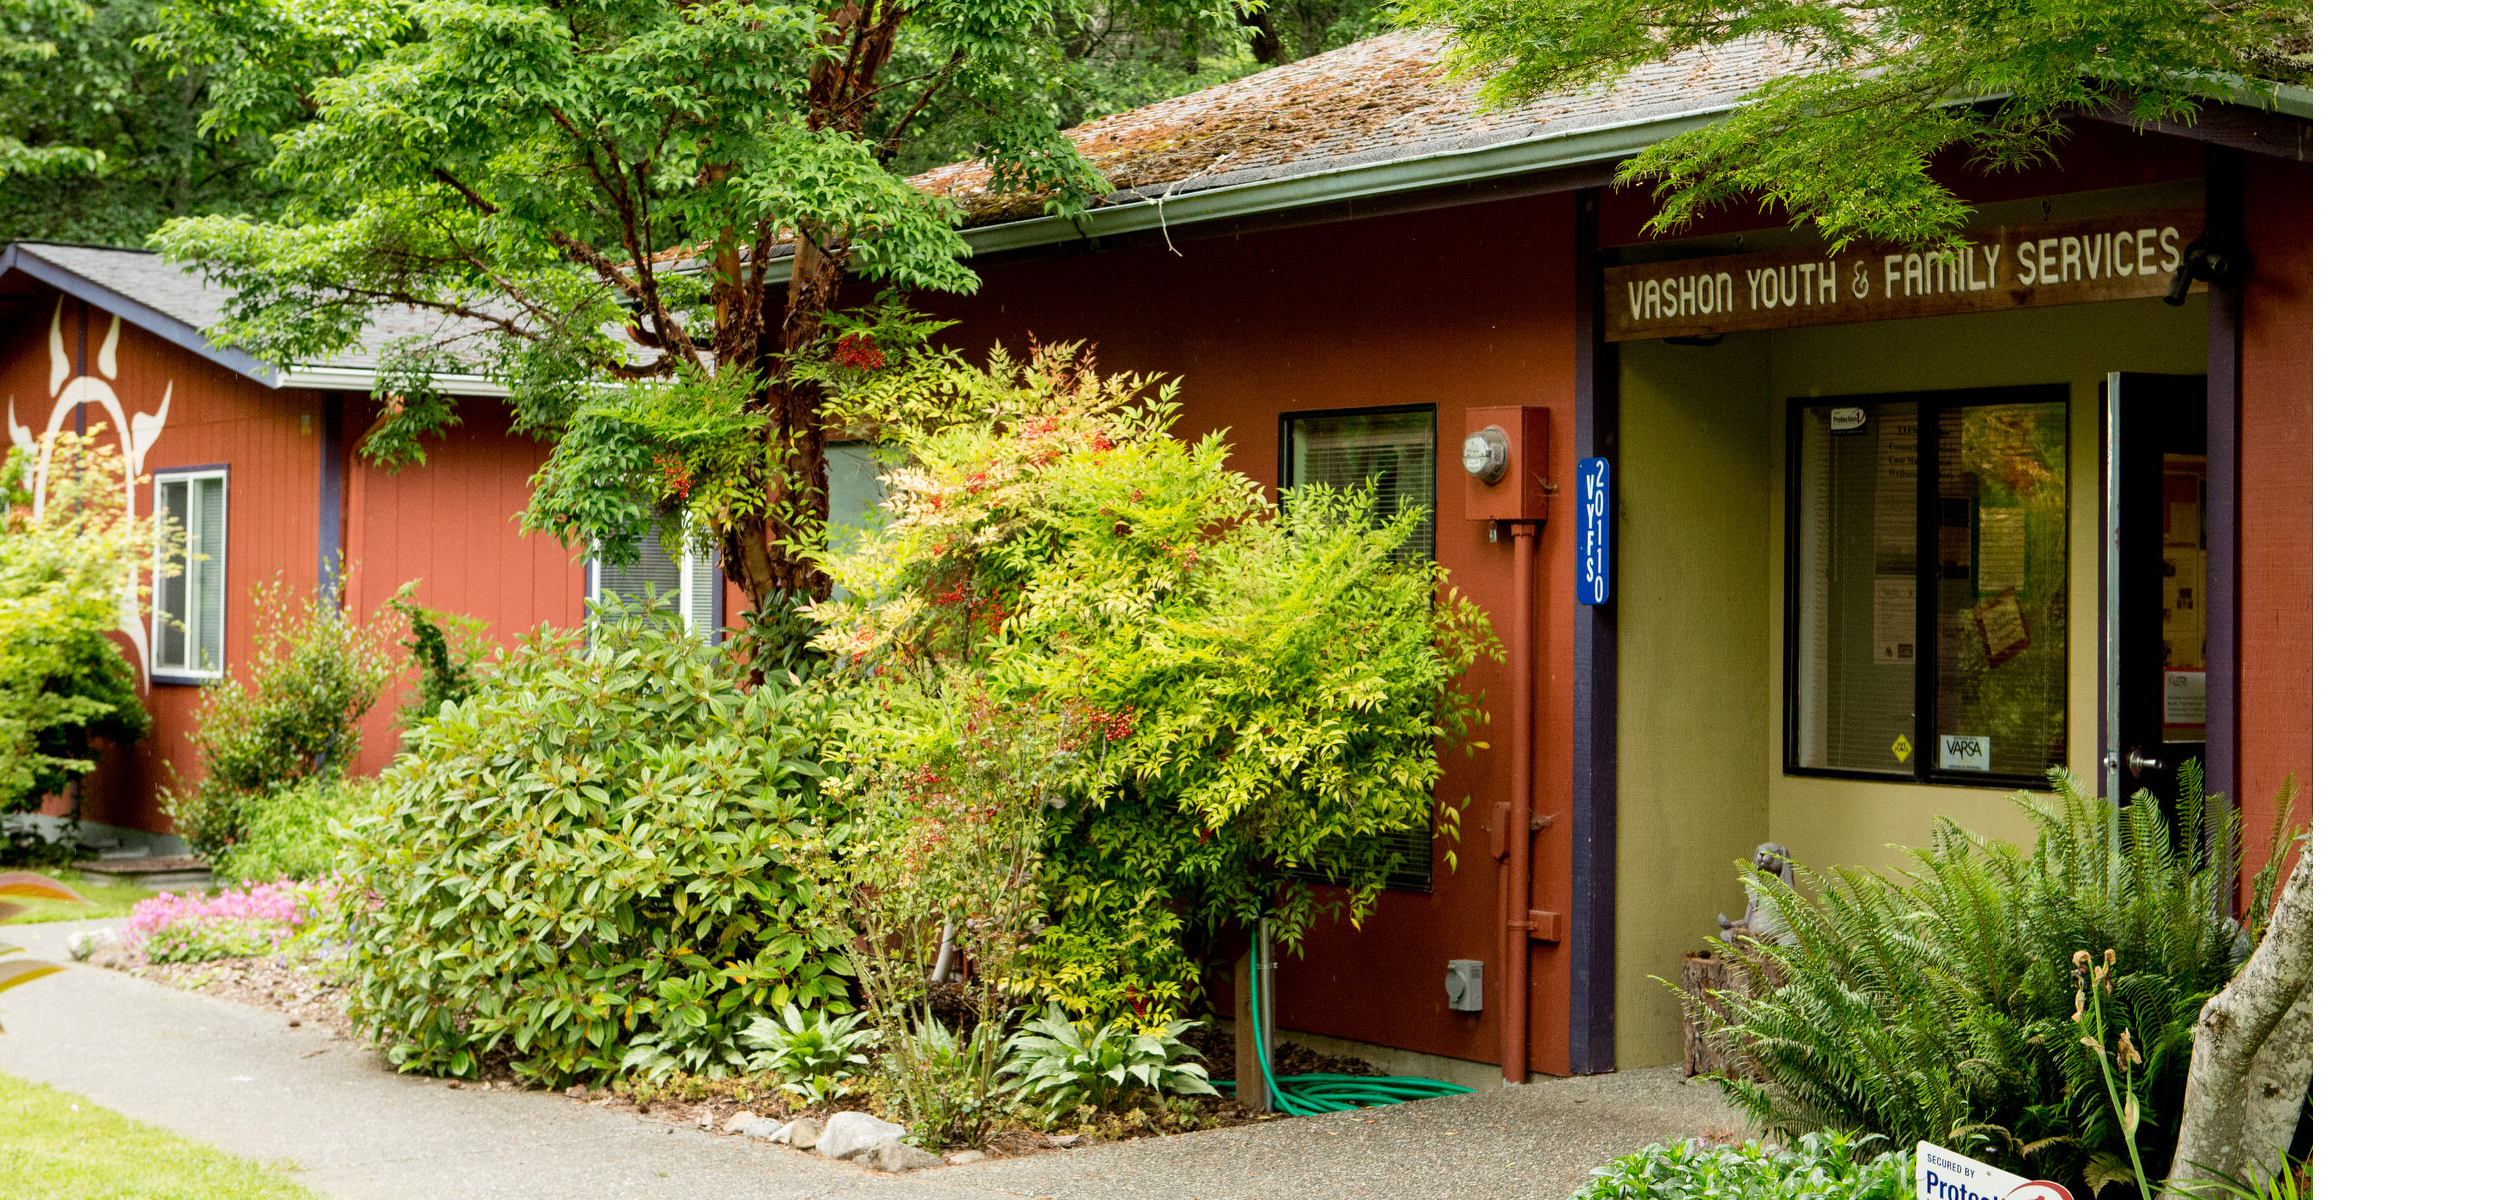 Vashon Youth and Family Services